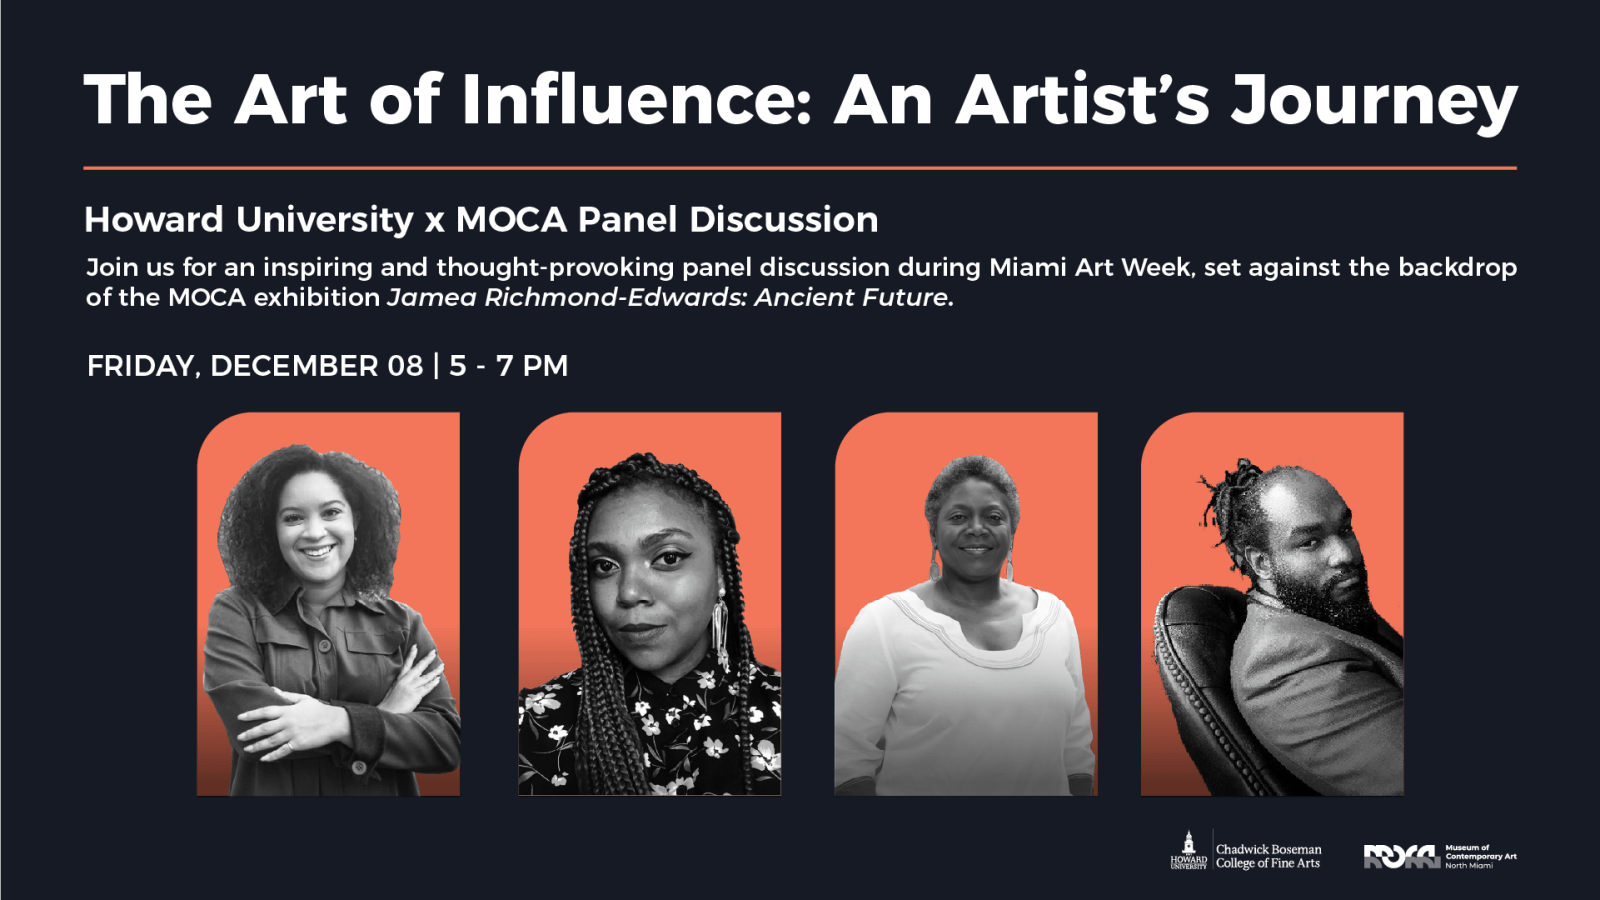 Howard University will host "The Art of Influence: An Artist's Journey" at the Museum of Contemporary Art North Miami on December 8